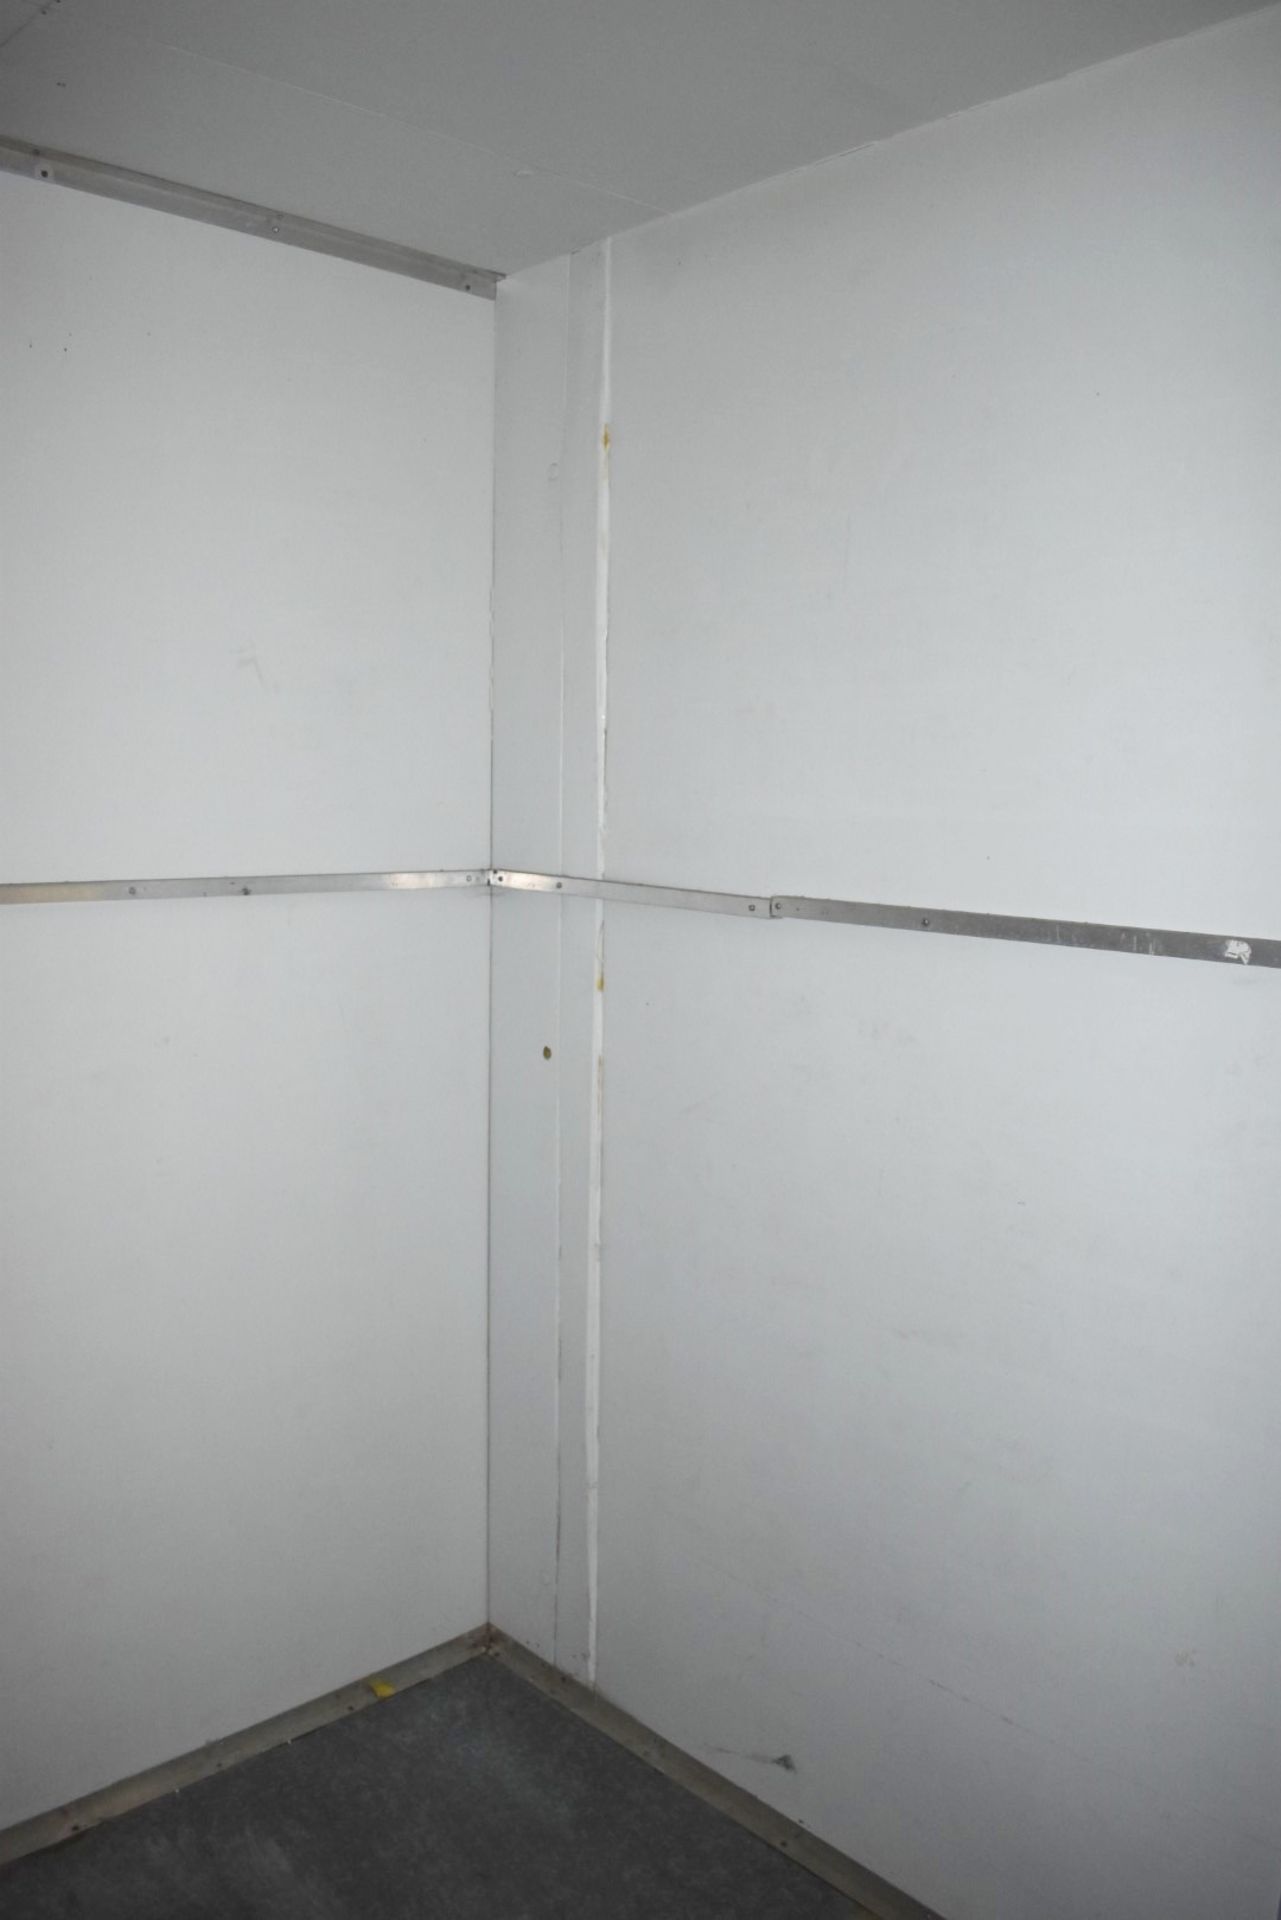 1 x Double Walk-In Refrigerator / Freezer With Searle Air Coolers and Sliding Doors - Ref B2 - Image 8 of 16